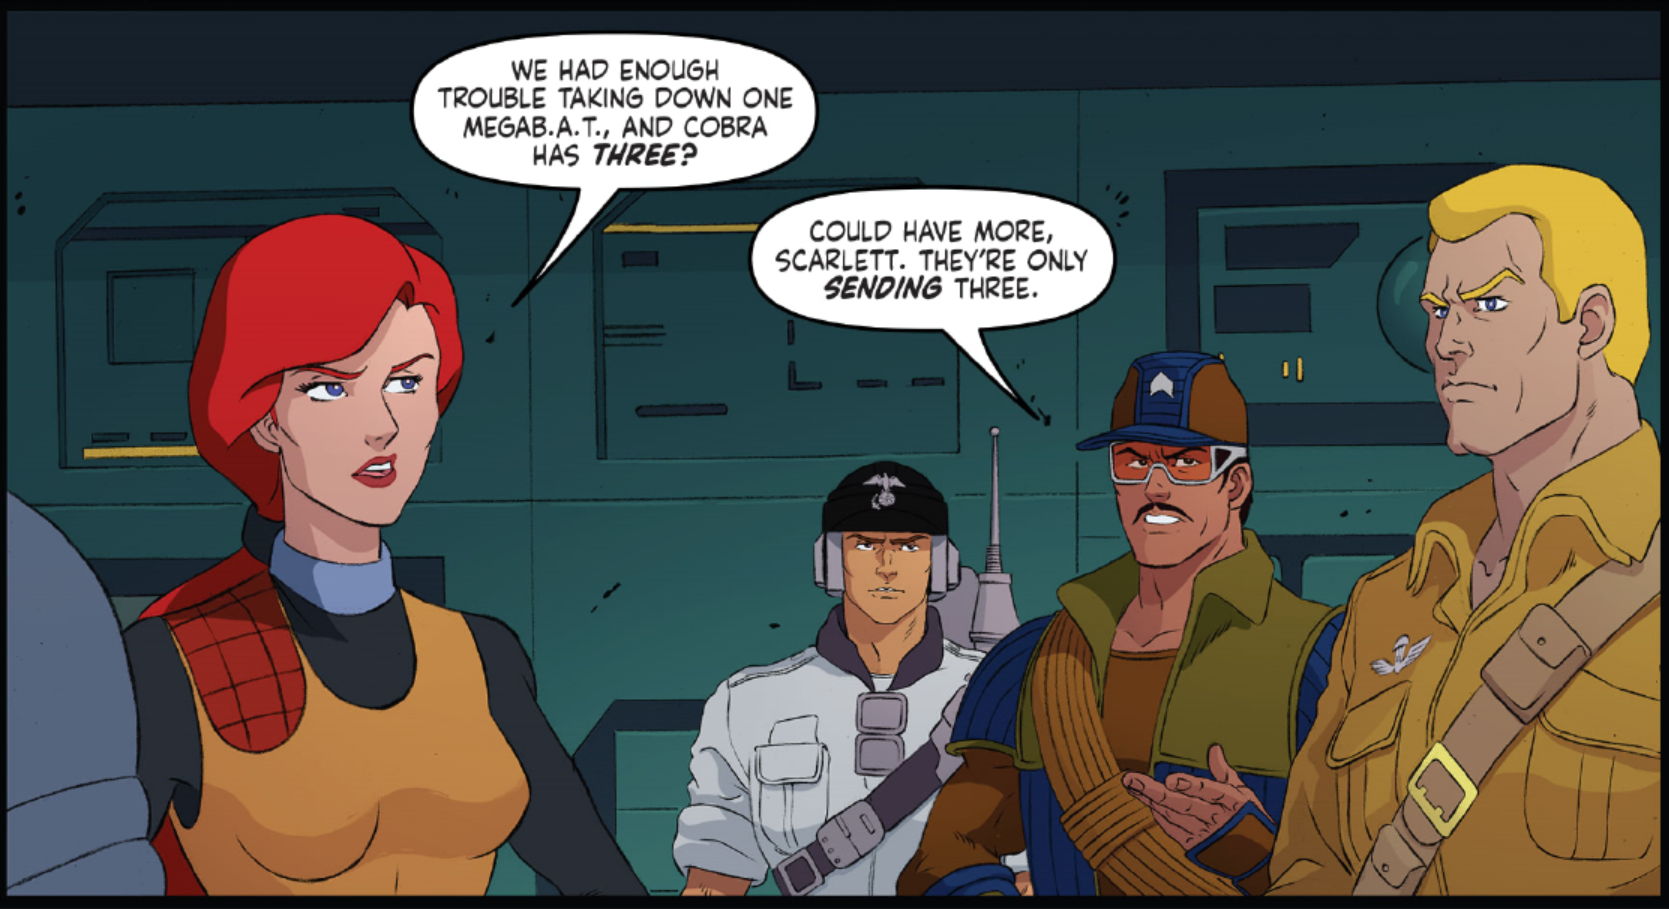 G.I. JOE SATURDAY MORNING ADVENTURES #1 [Review]: Bring Your Cereal Bowls.